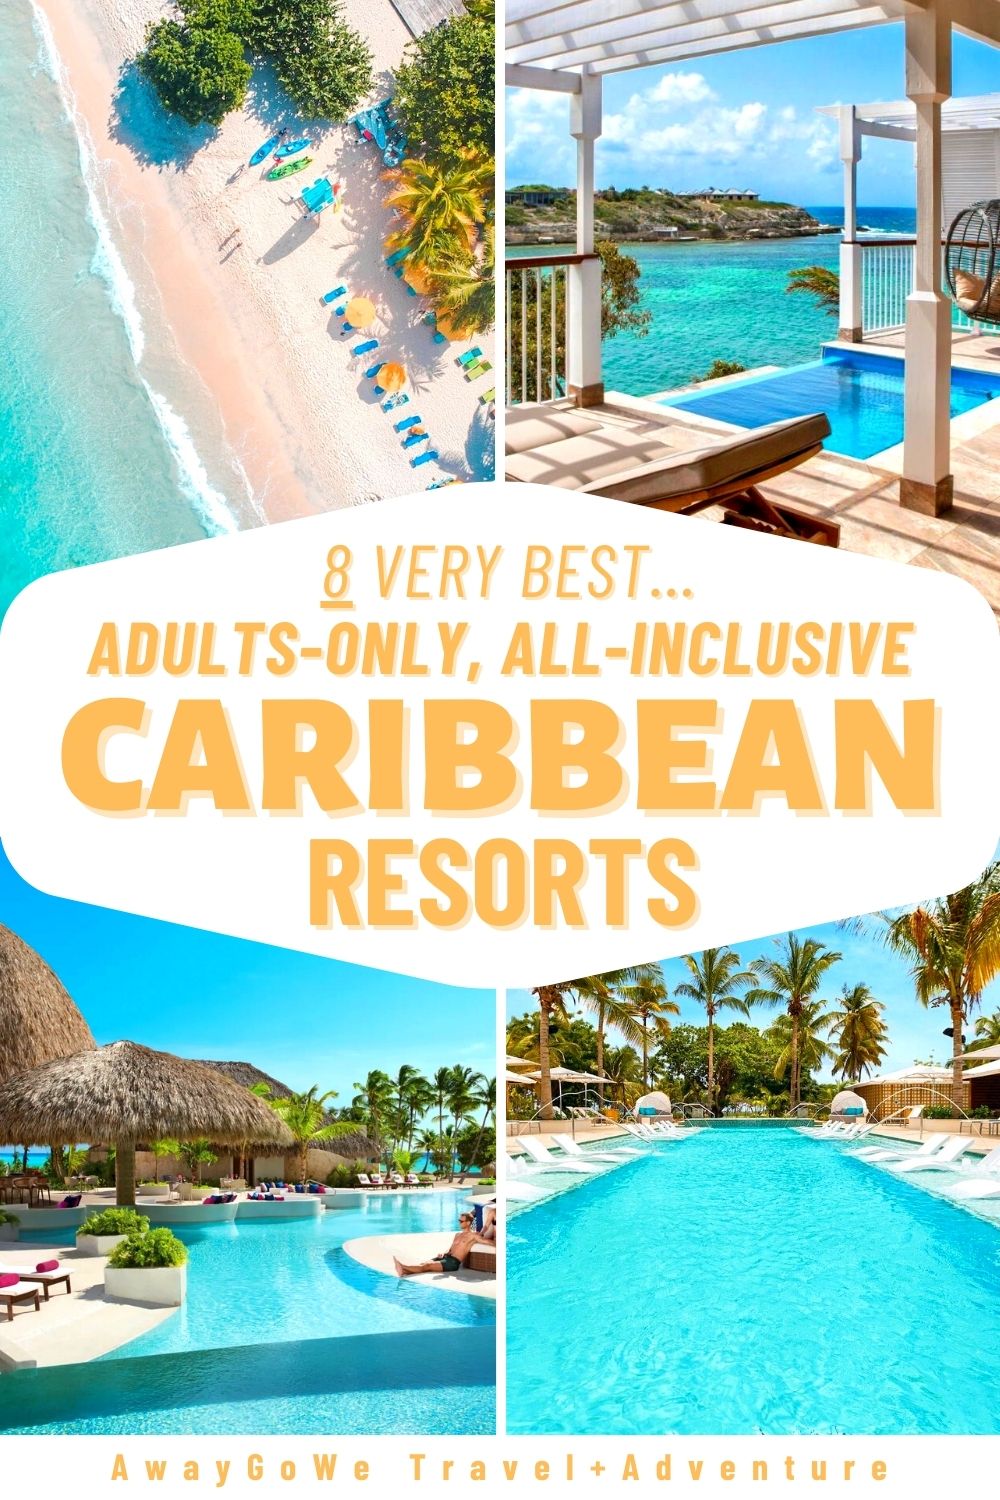 best adults-only all-inclusive Caribbean resorts